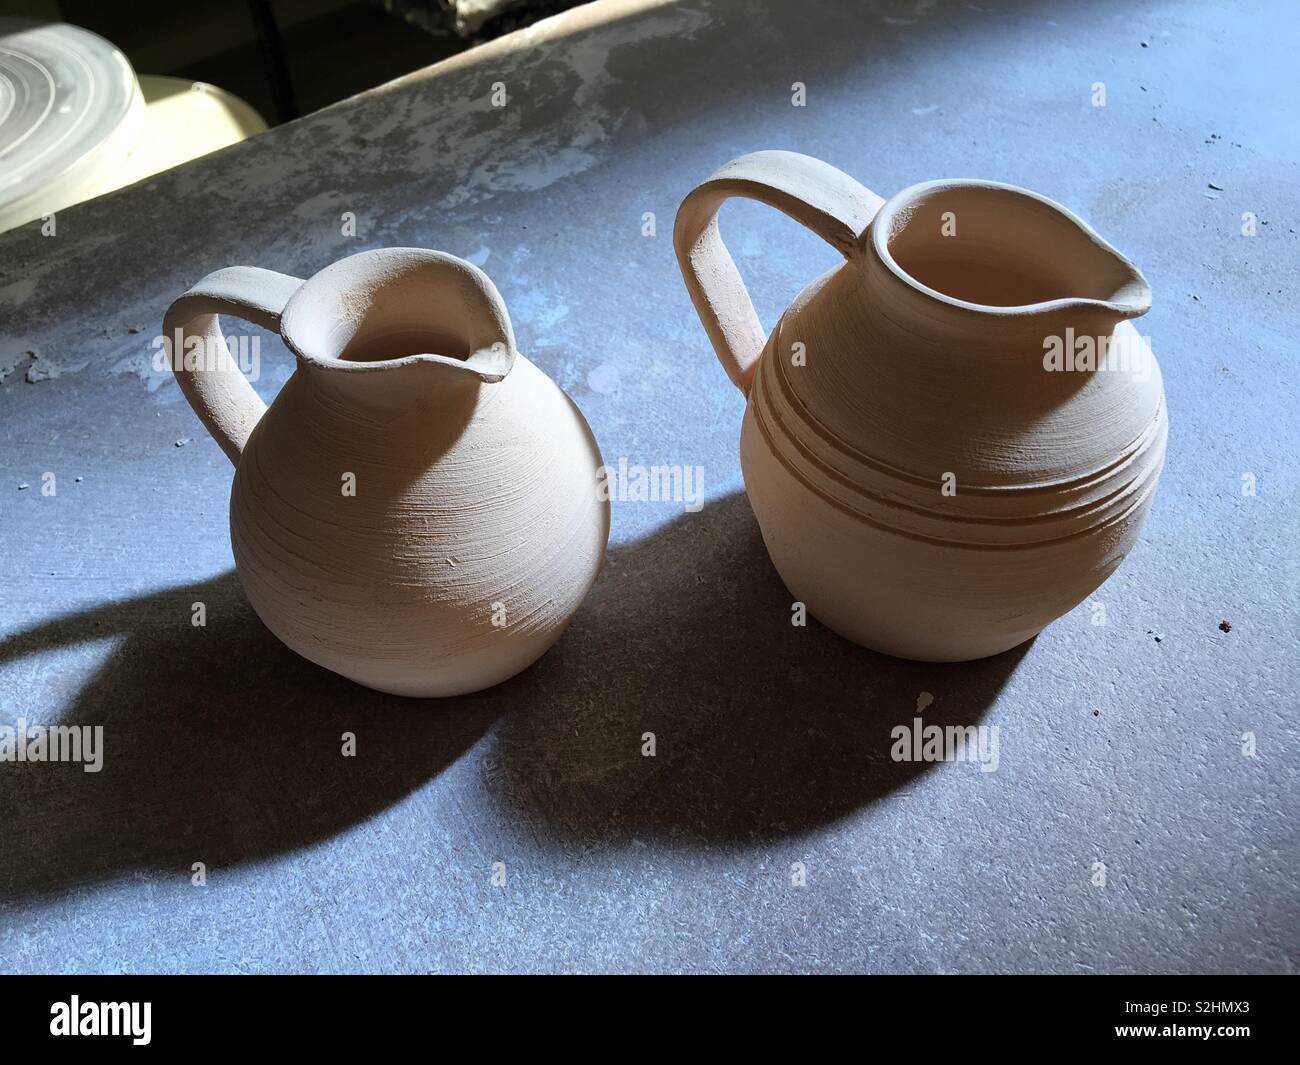 https://c8.alamy.com/comp/S2HMX3/two-small-pottery-olive-oil-jugs-waiting-to-be-glazed-S2HMX3.jpg